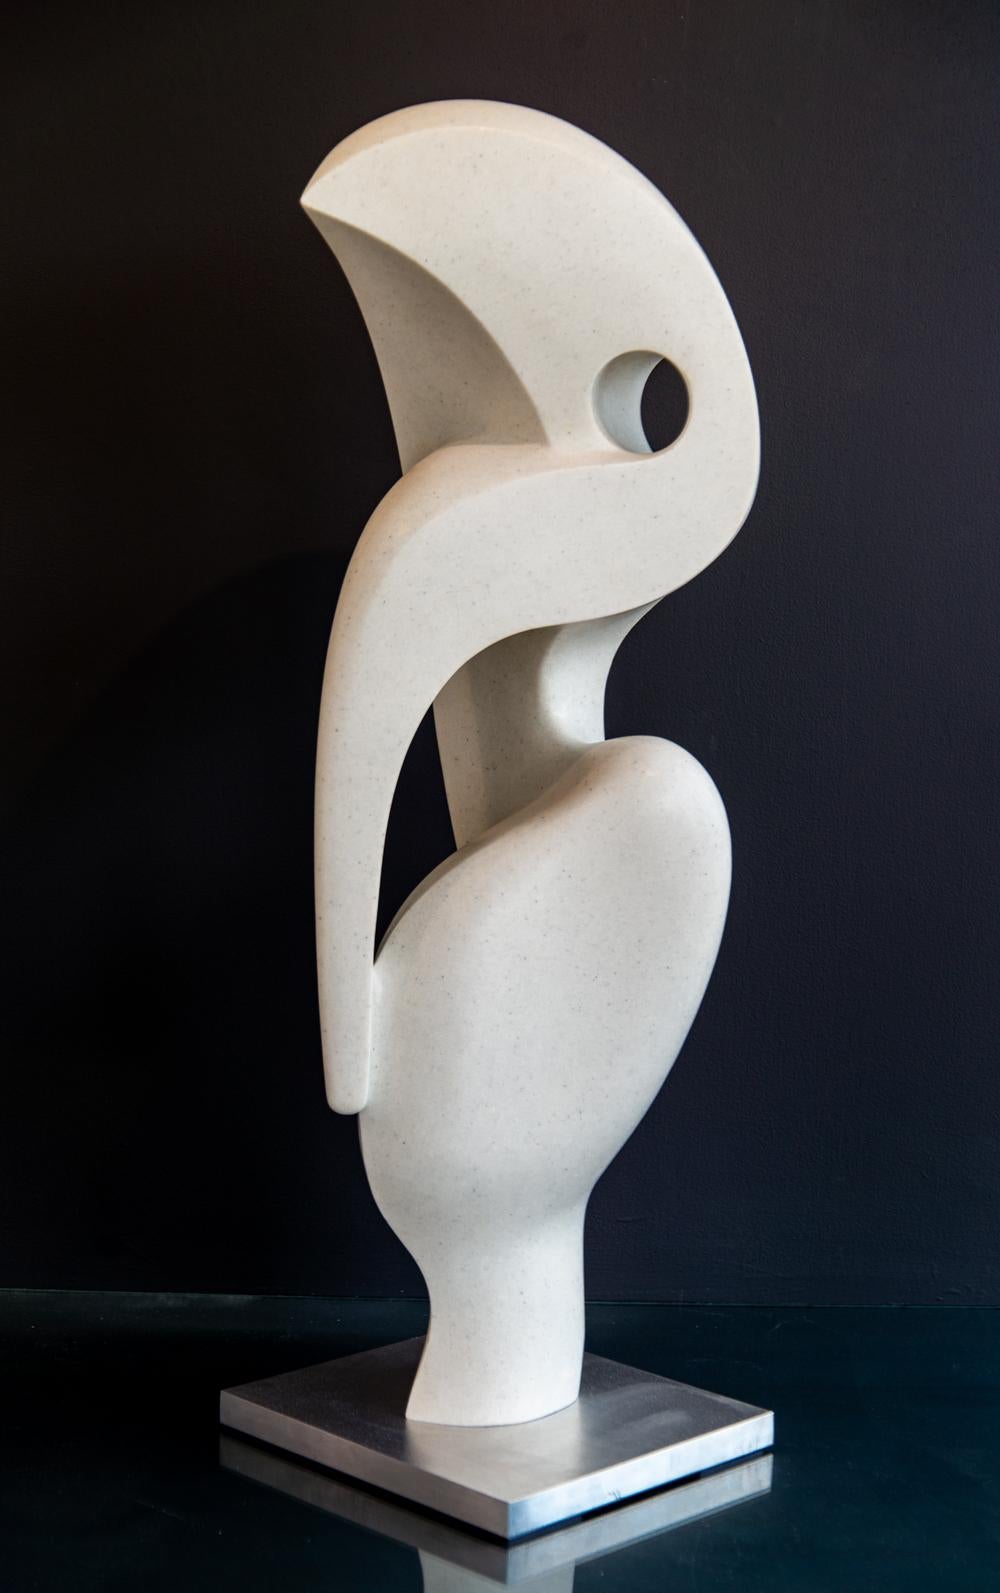 Heron 5/50 - smooth, polished, abstracted figurative, white marble sculpture - Sculpture by Jeremy Guy